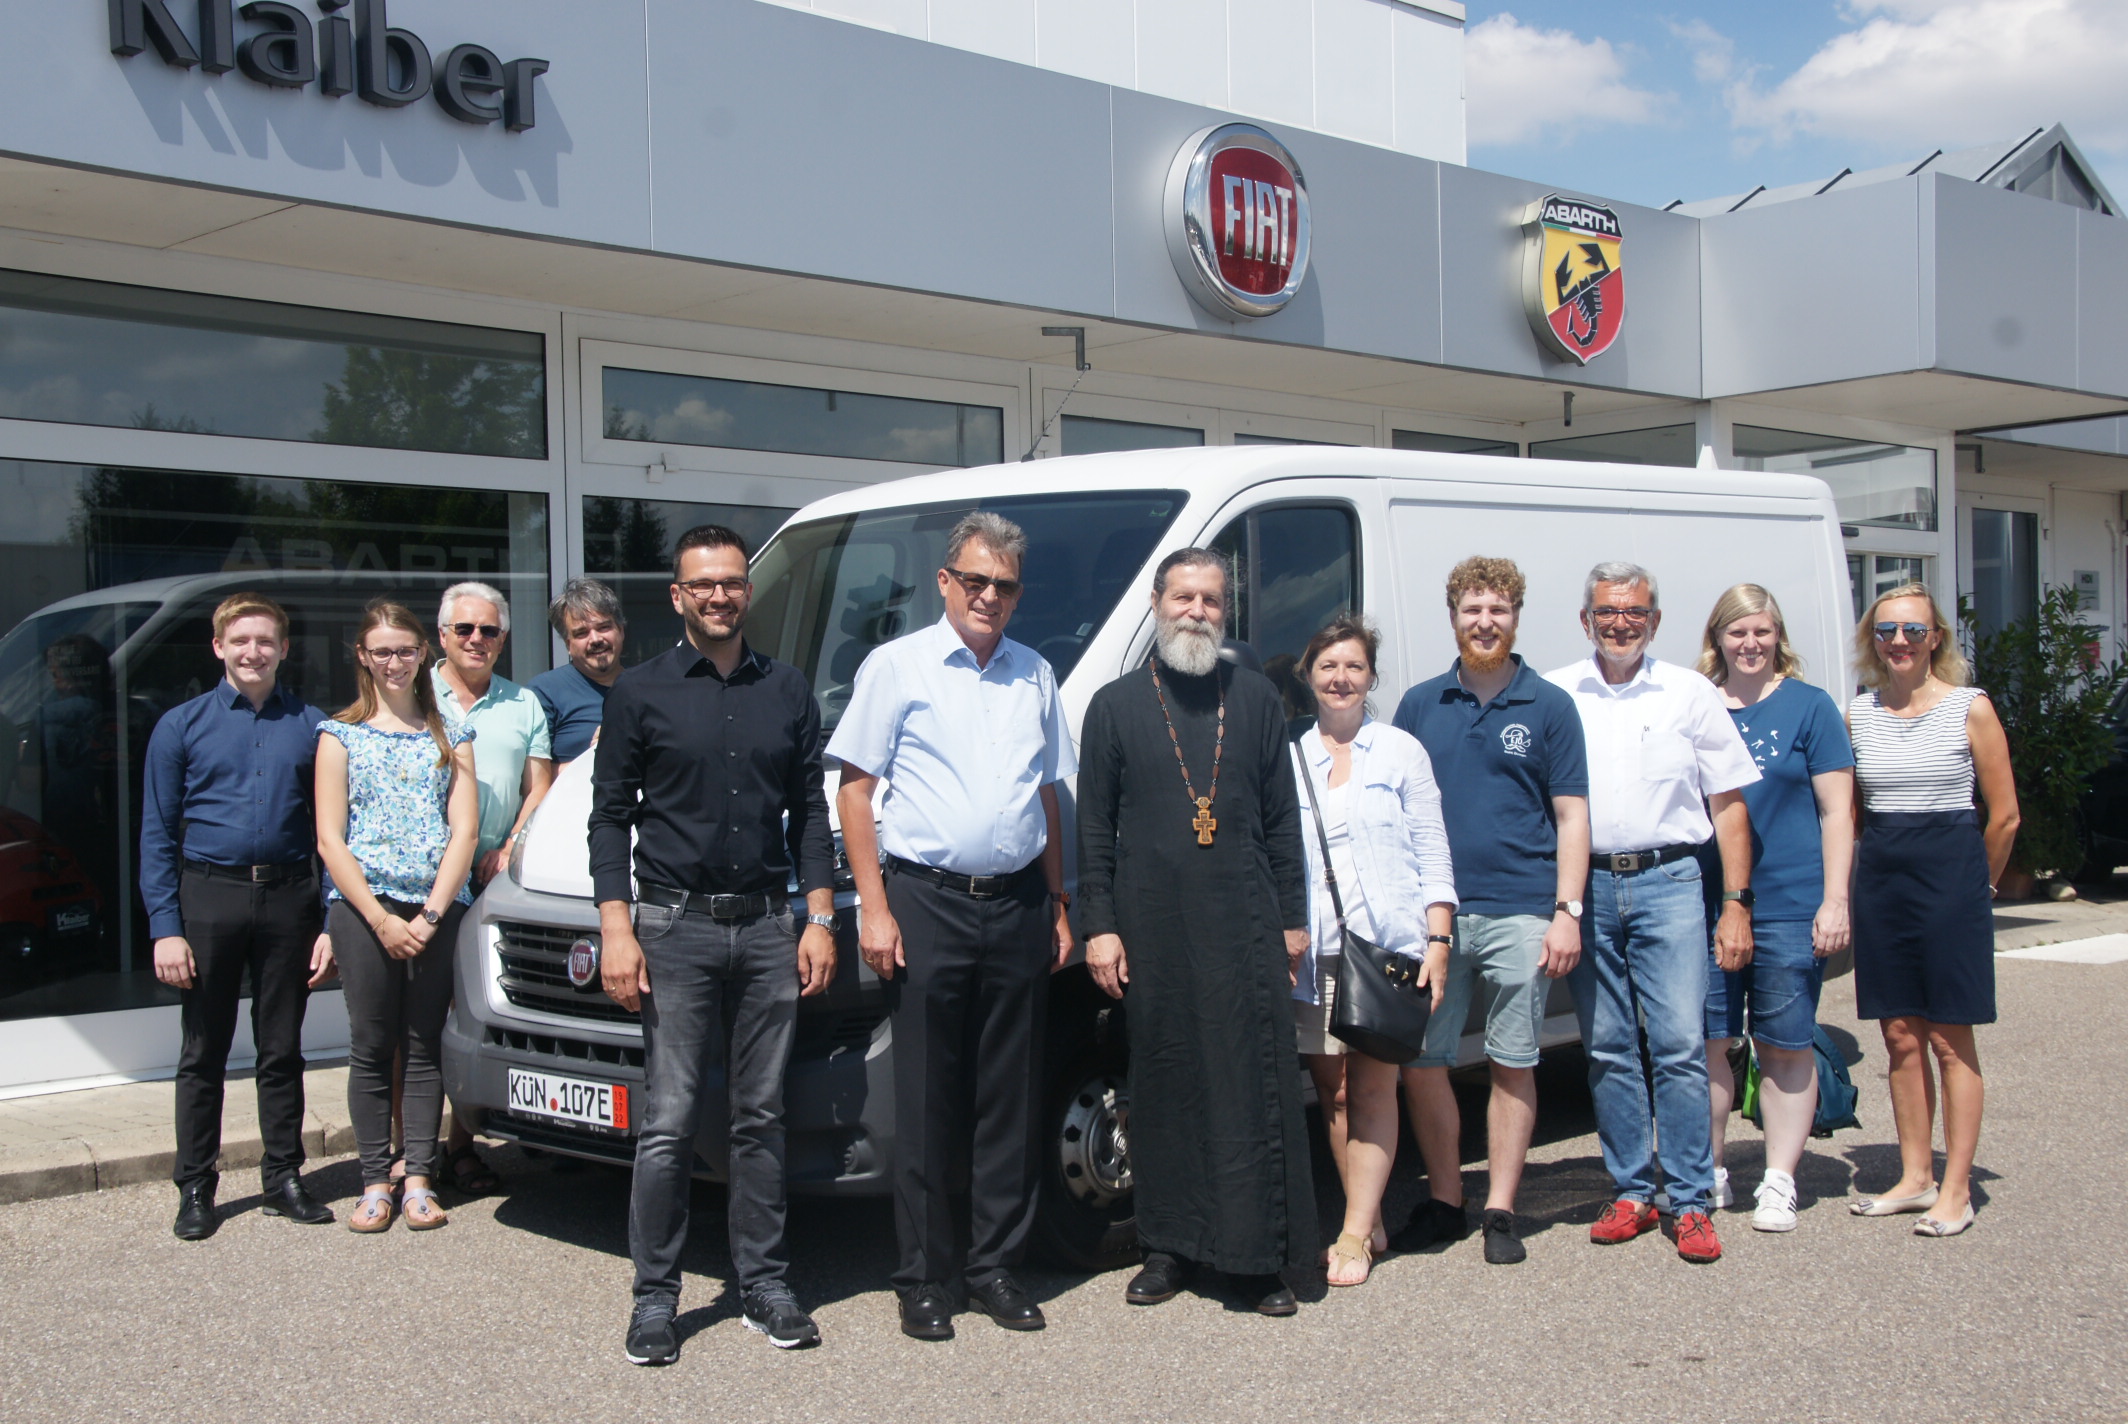 Vehicle donation for Ukraine: Albert Berner Foundation supports care for needy villagers Berner Group